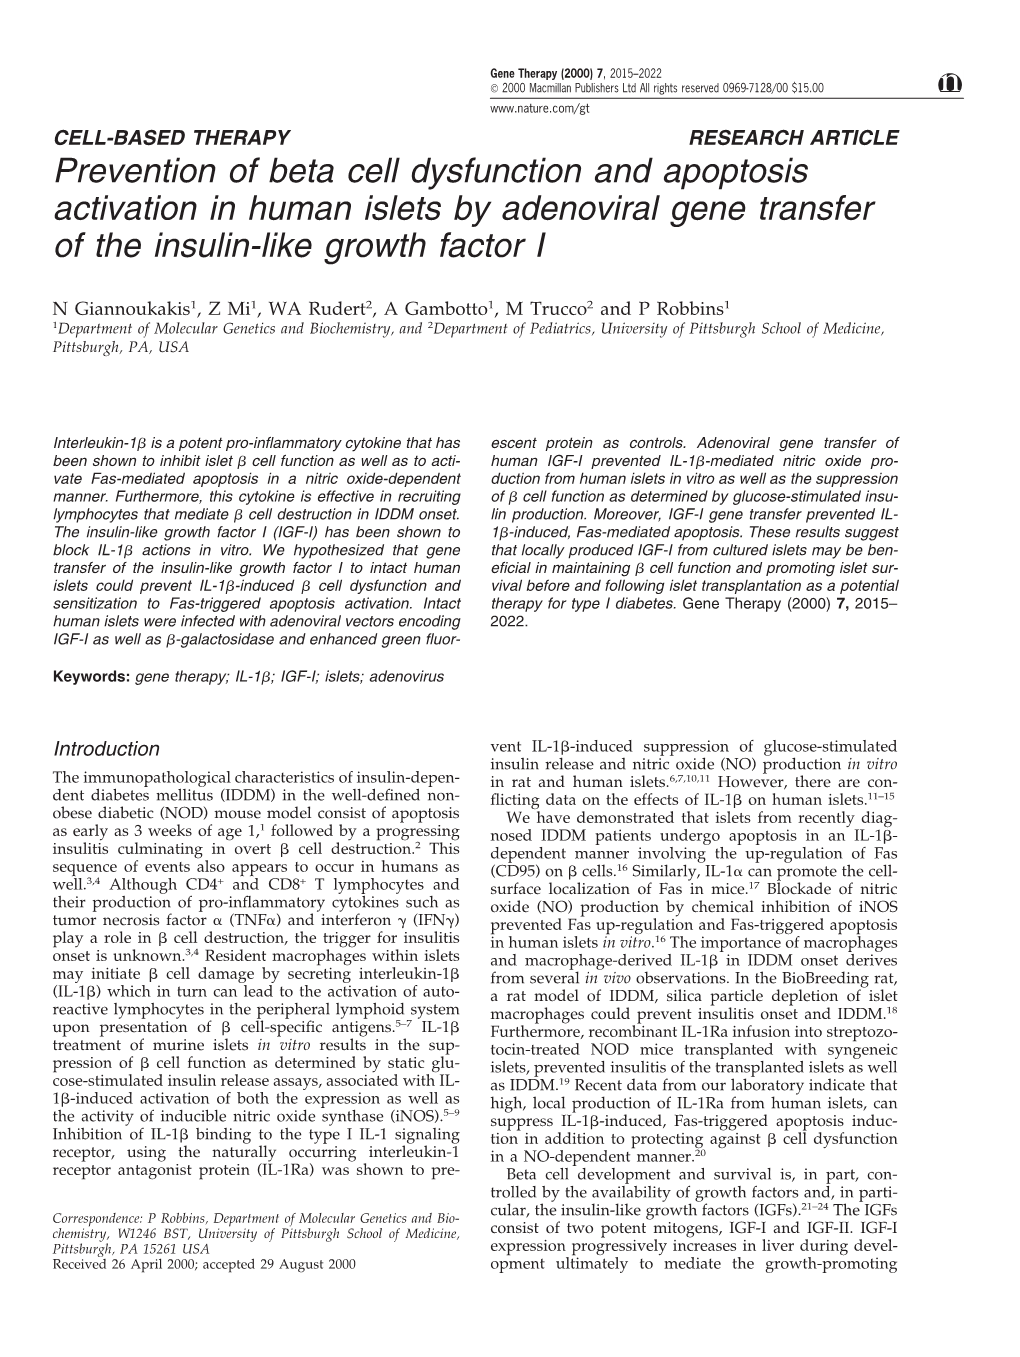 Prevention of Beta Cell Dysfunction and Apoptosis Activation in Human Islets by Adenoviral Gene Transfer of the Insulin-Like Growth Factor I